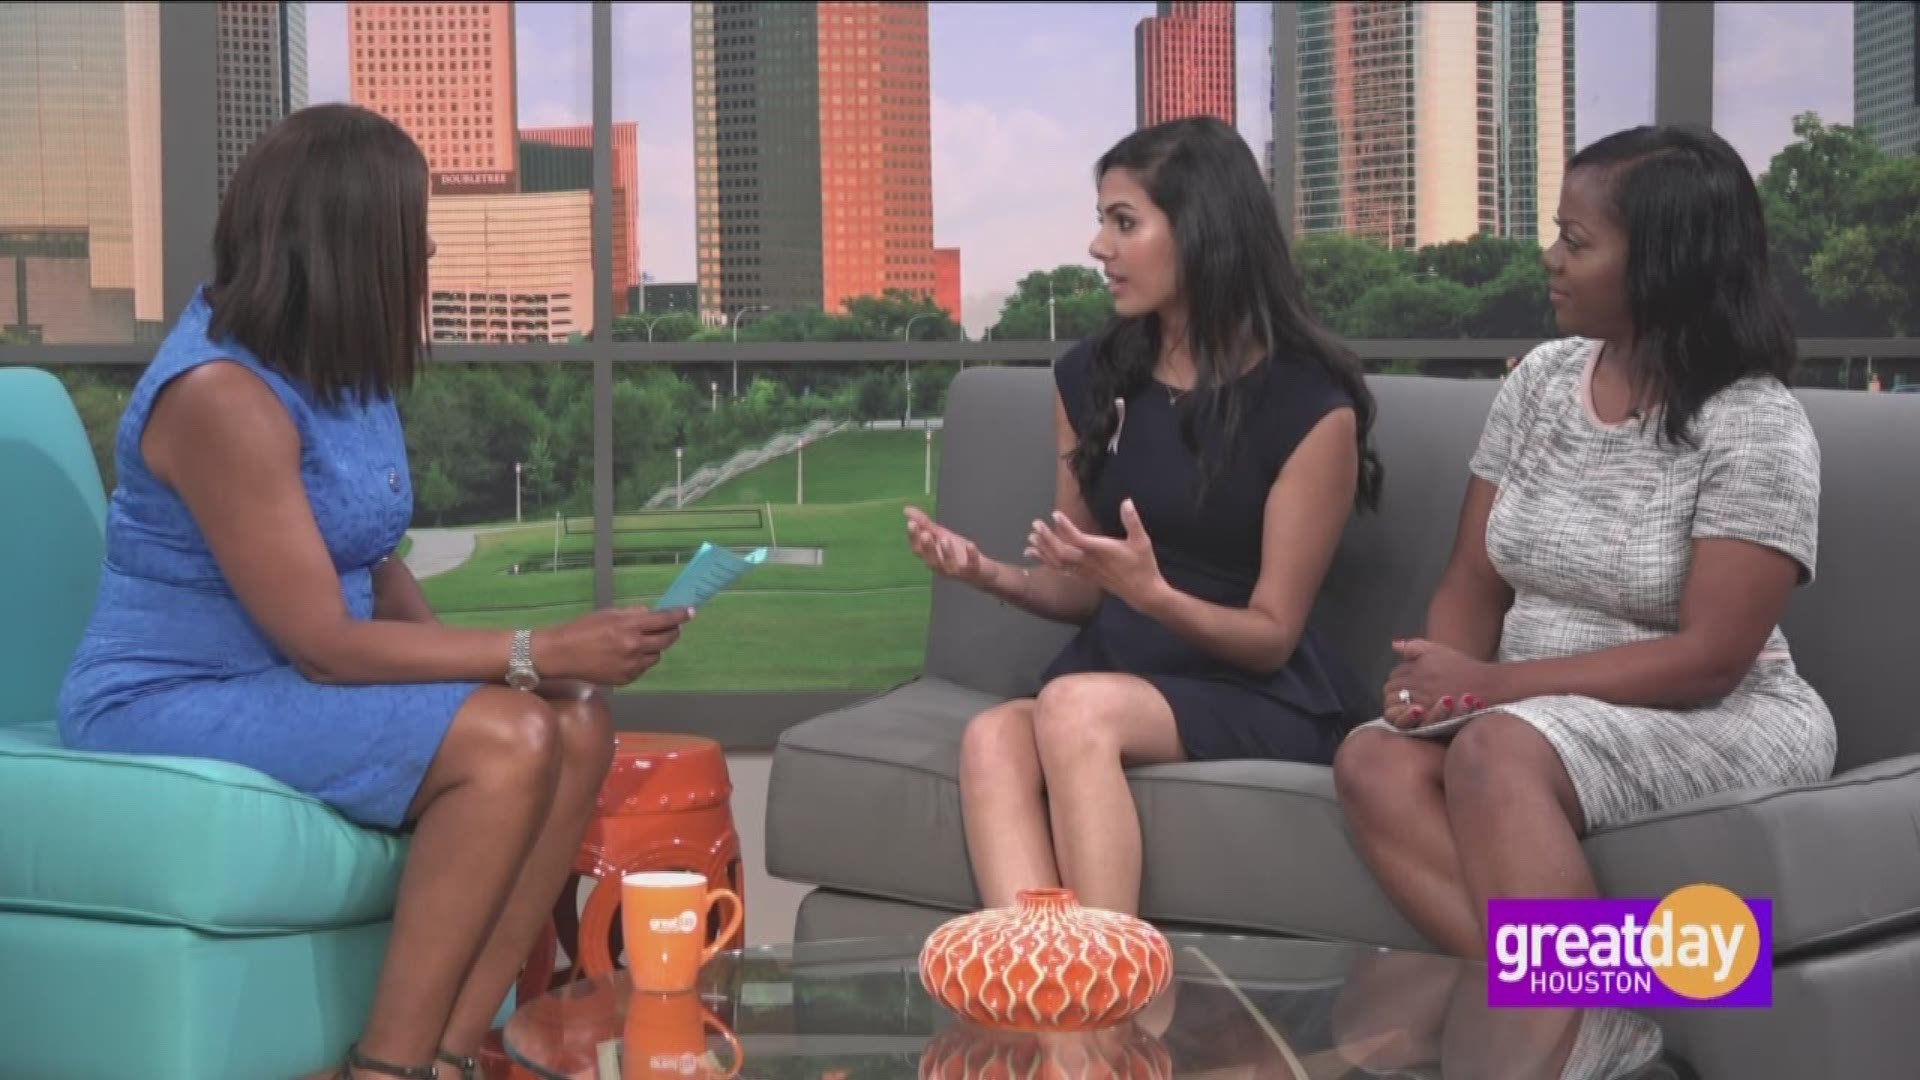 Dr. Kriti Mohan and Dr. Adrienne Floyd with Memorial Hermann Greater Heights discuss reconstructive surgery options following breast cancer treatment.